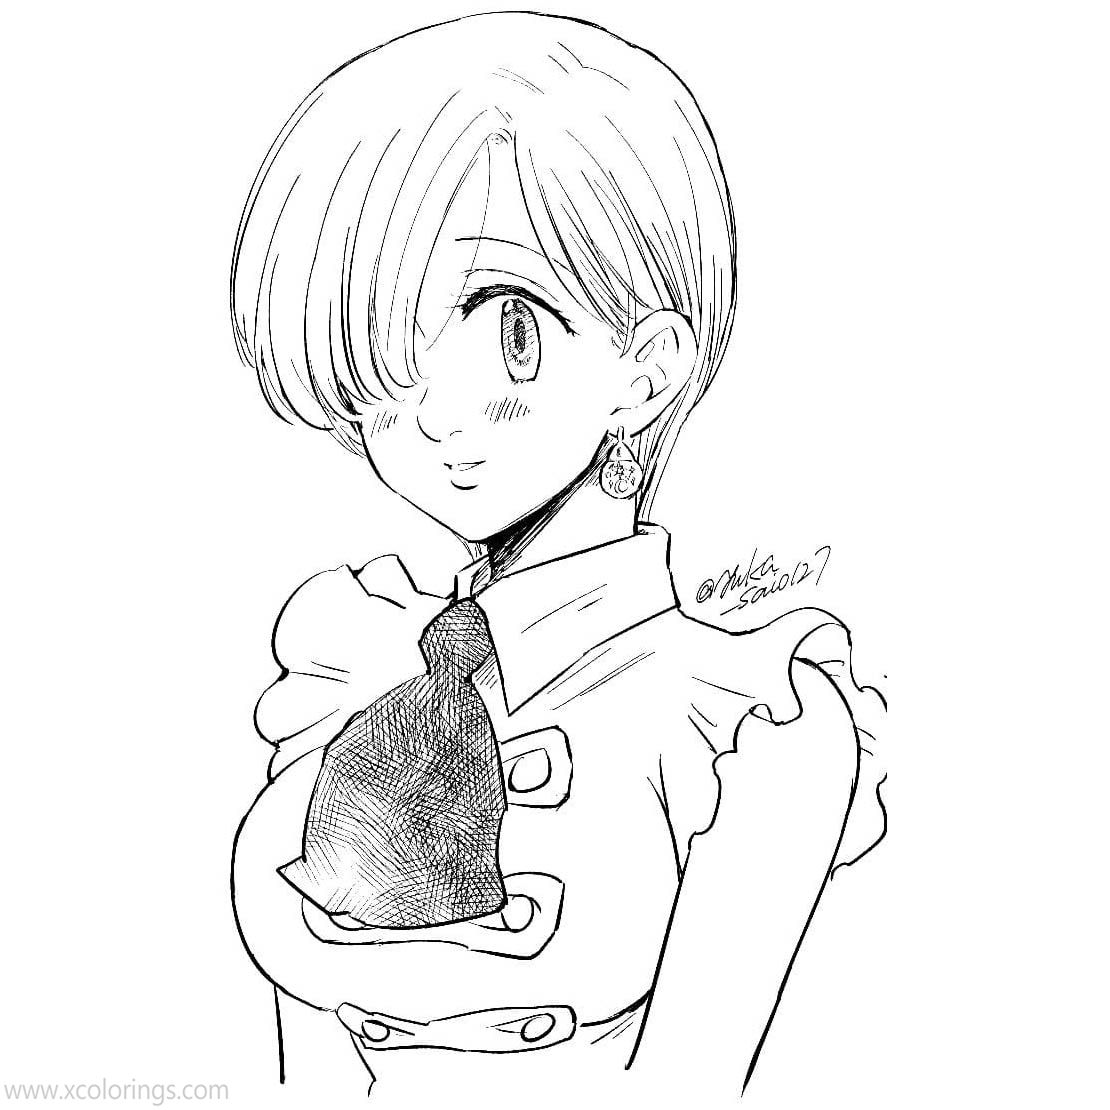 Free The Seven Deadly Sins Coloring Pages Elizabeth with Short Hair printable